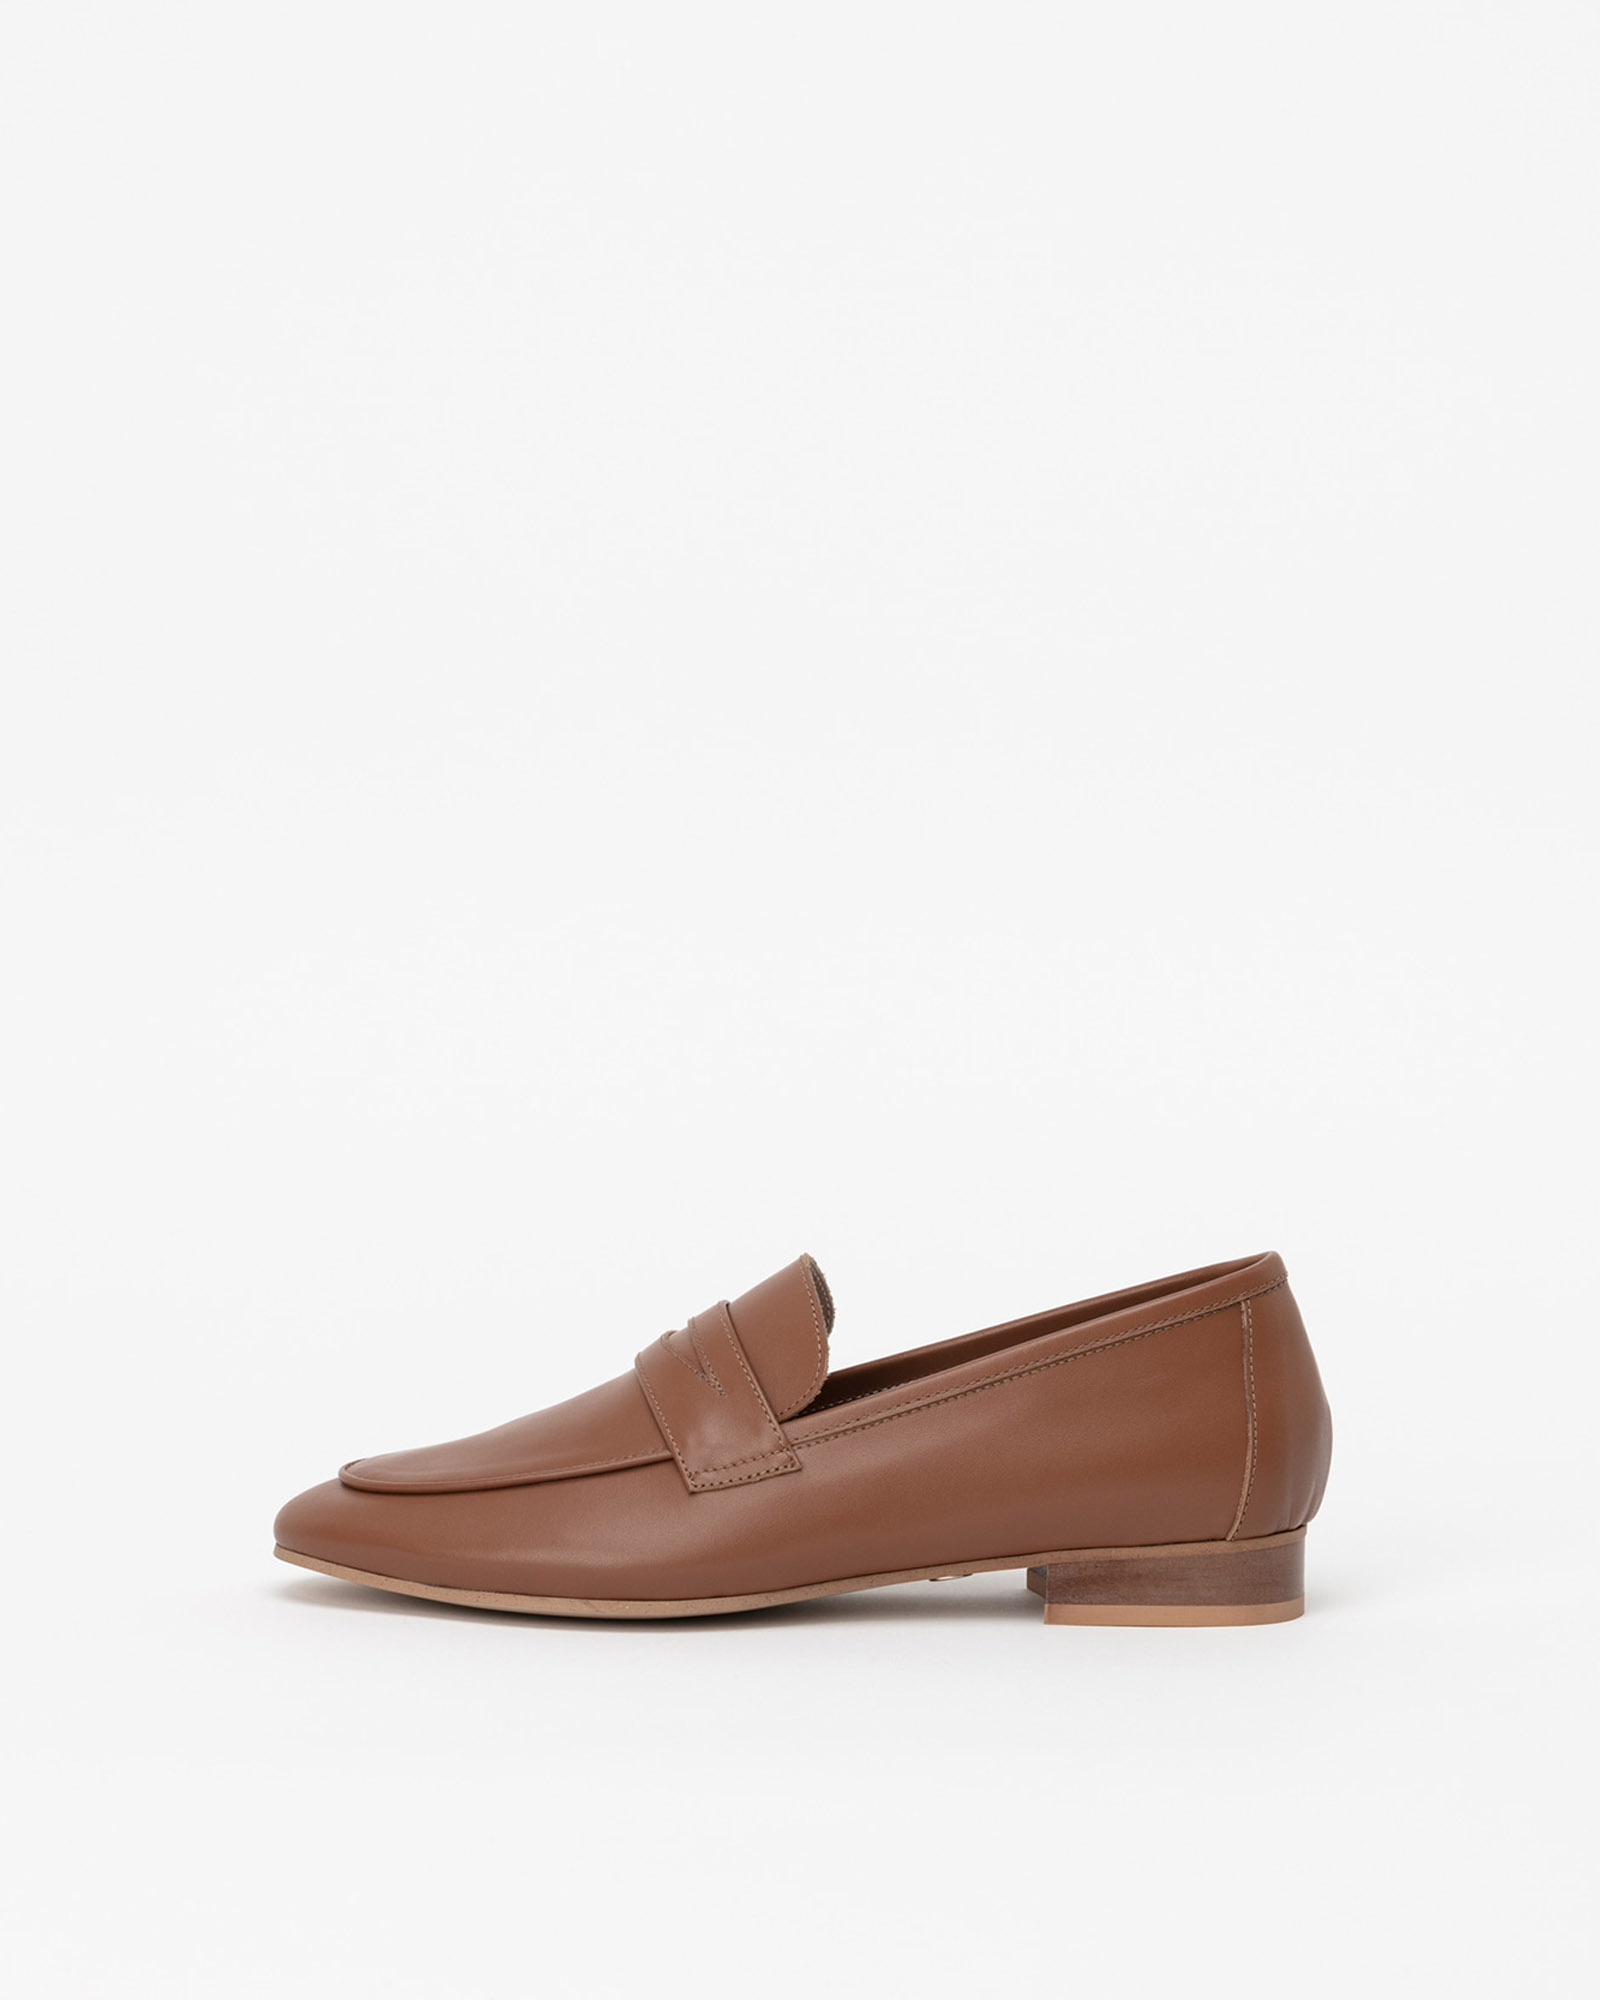 Gant Soft Loafers in Starfish Camel